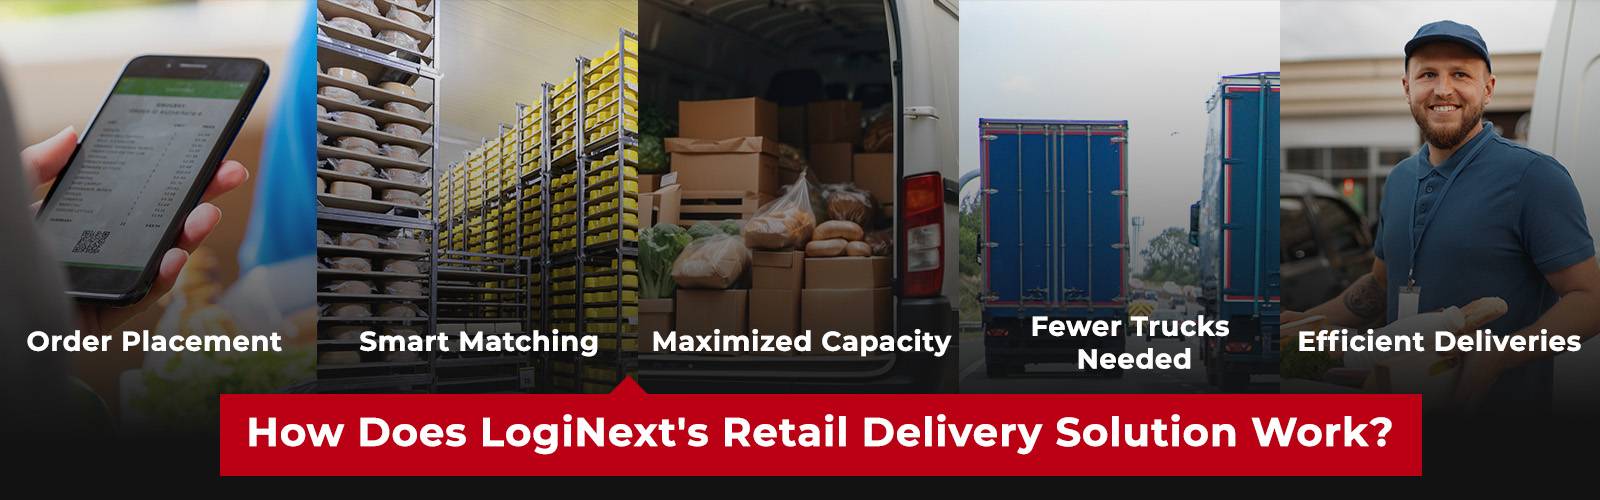 Best retail delivery solution- LogiNext